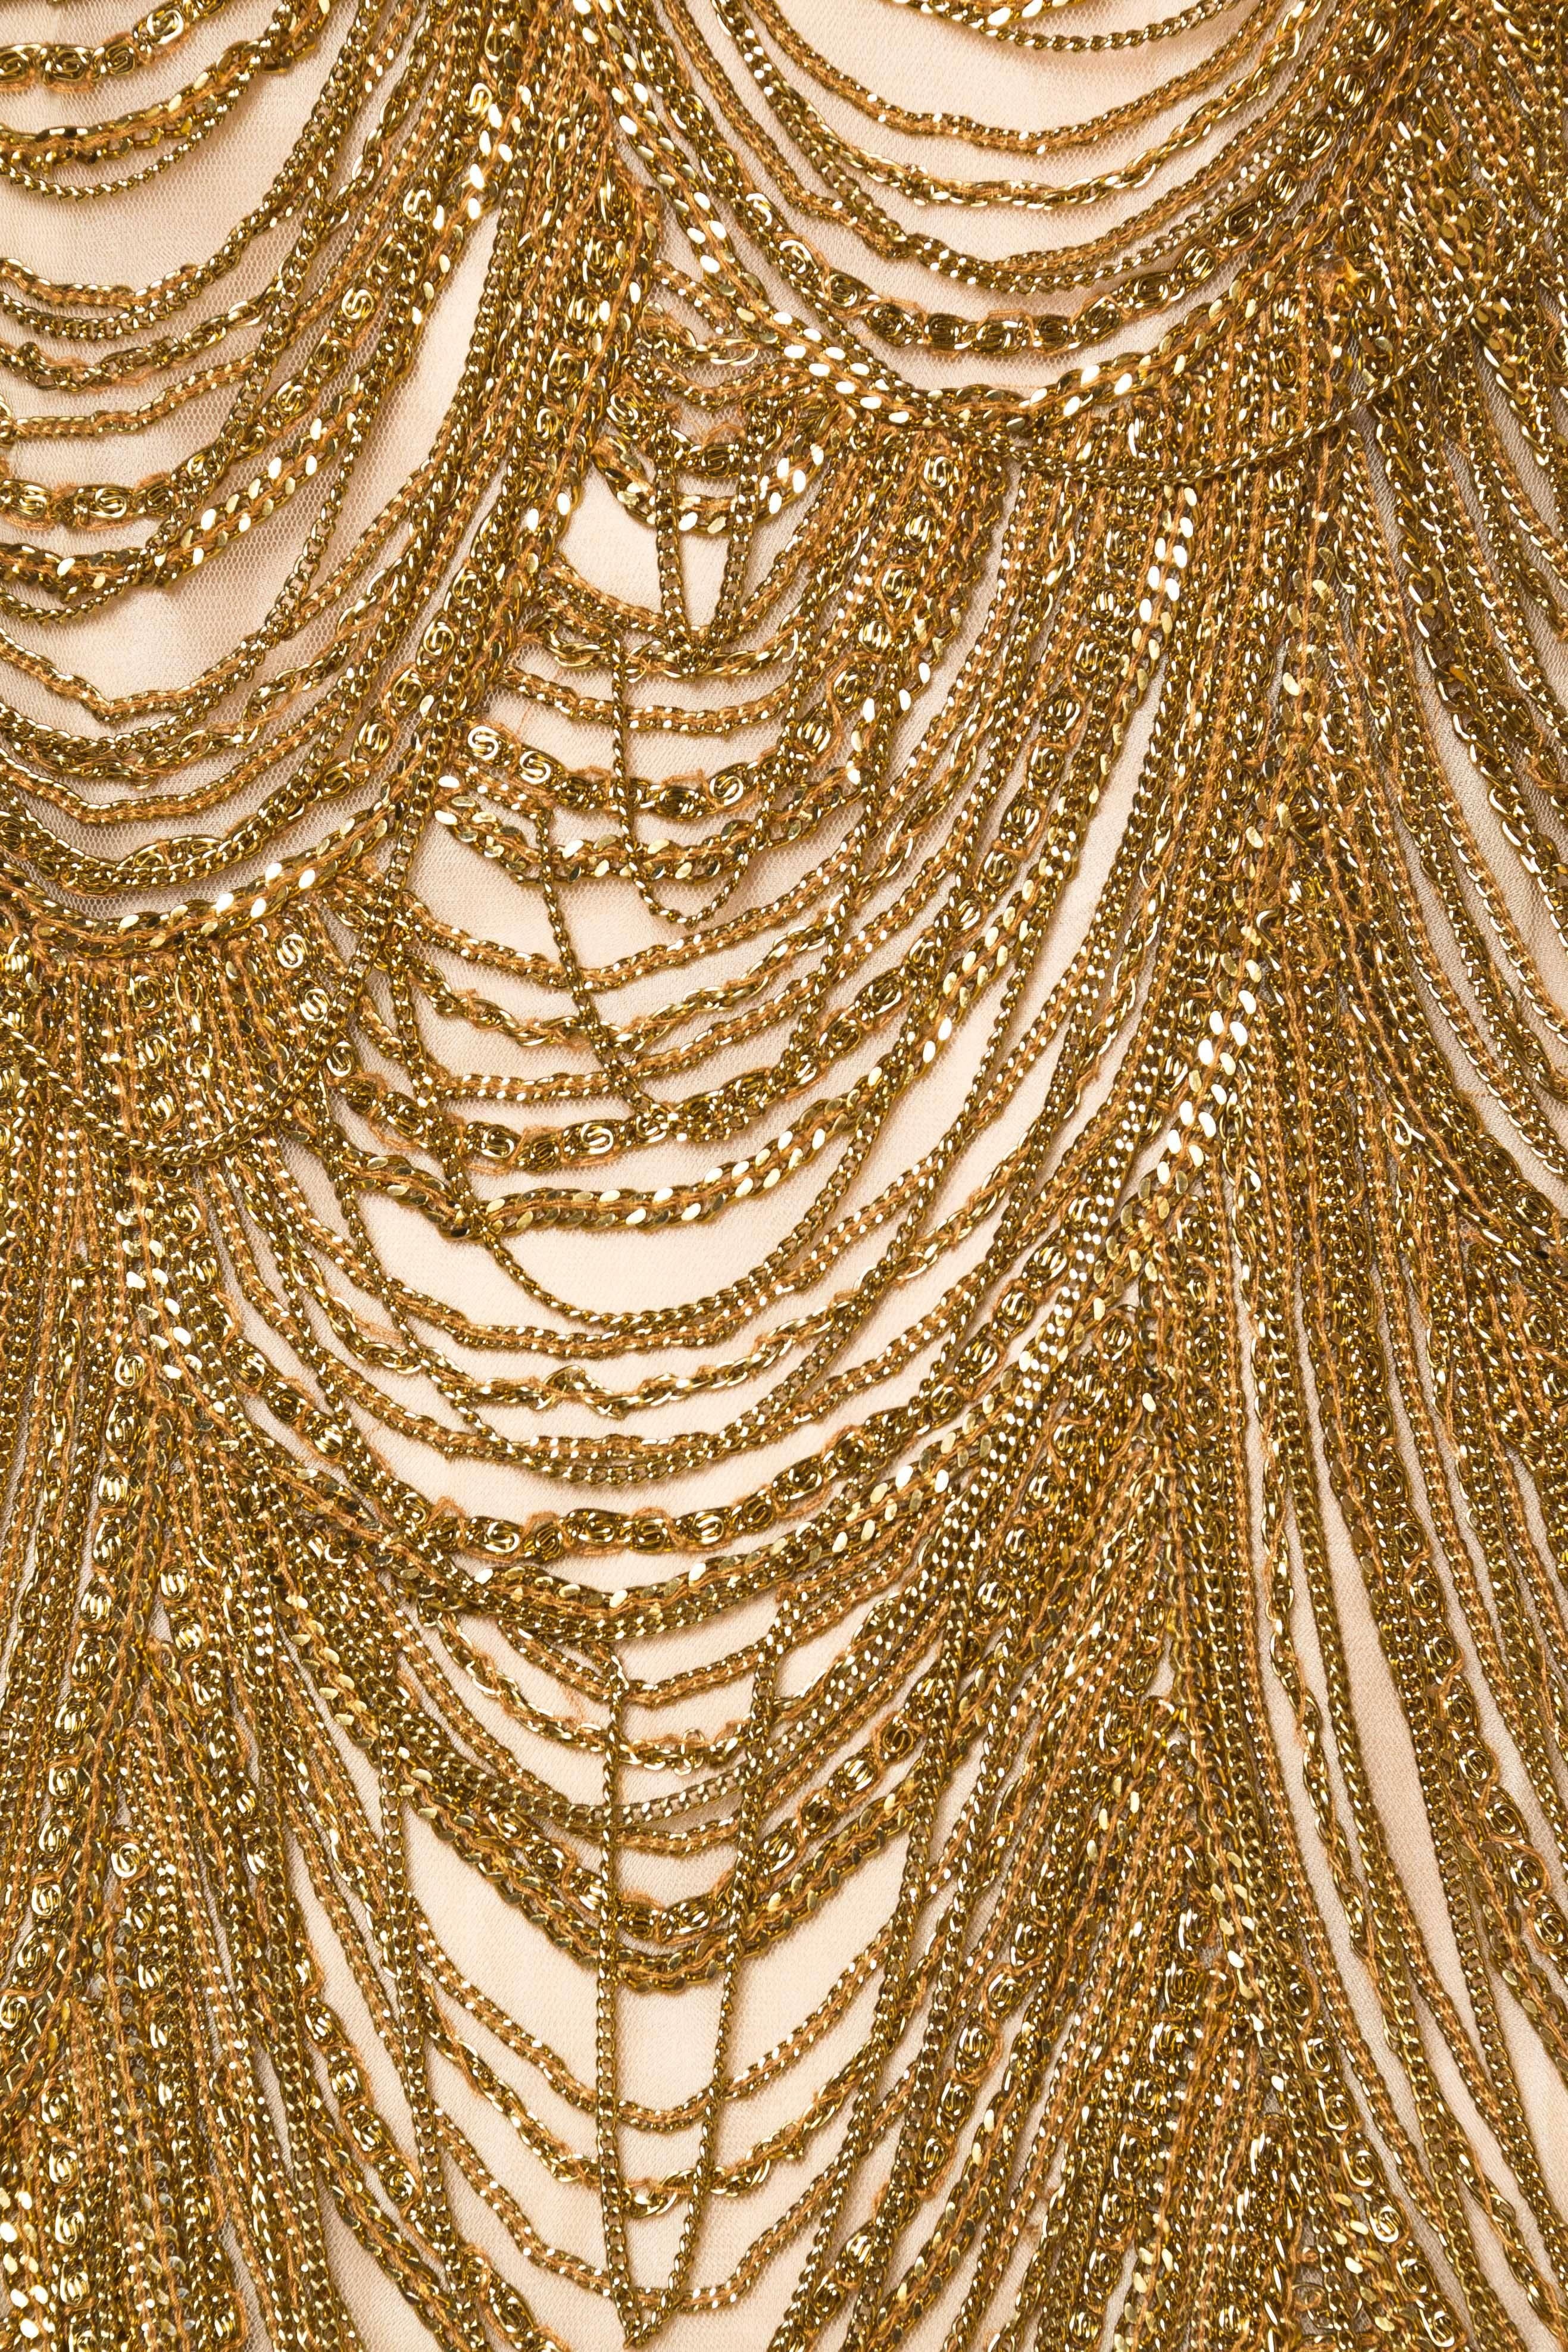 Women's Naeem Khan Nude Dress Dripping in Gold Chains For Sale